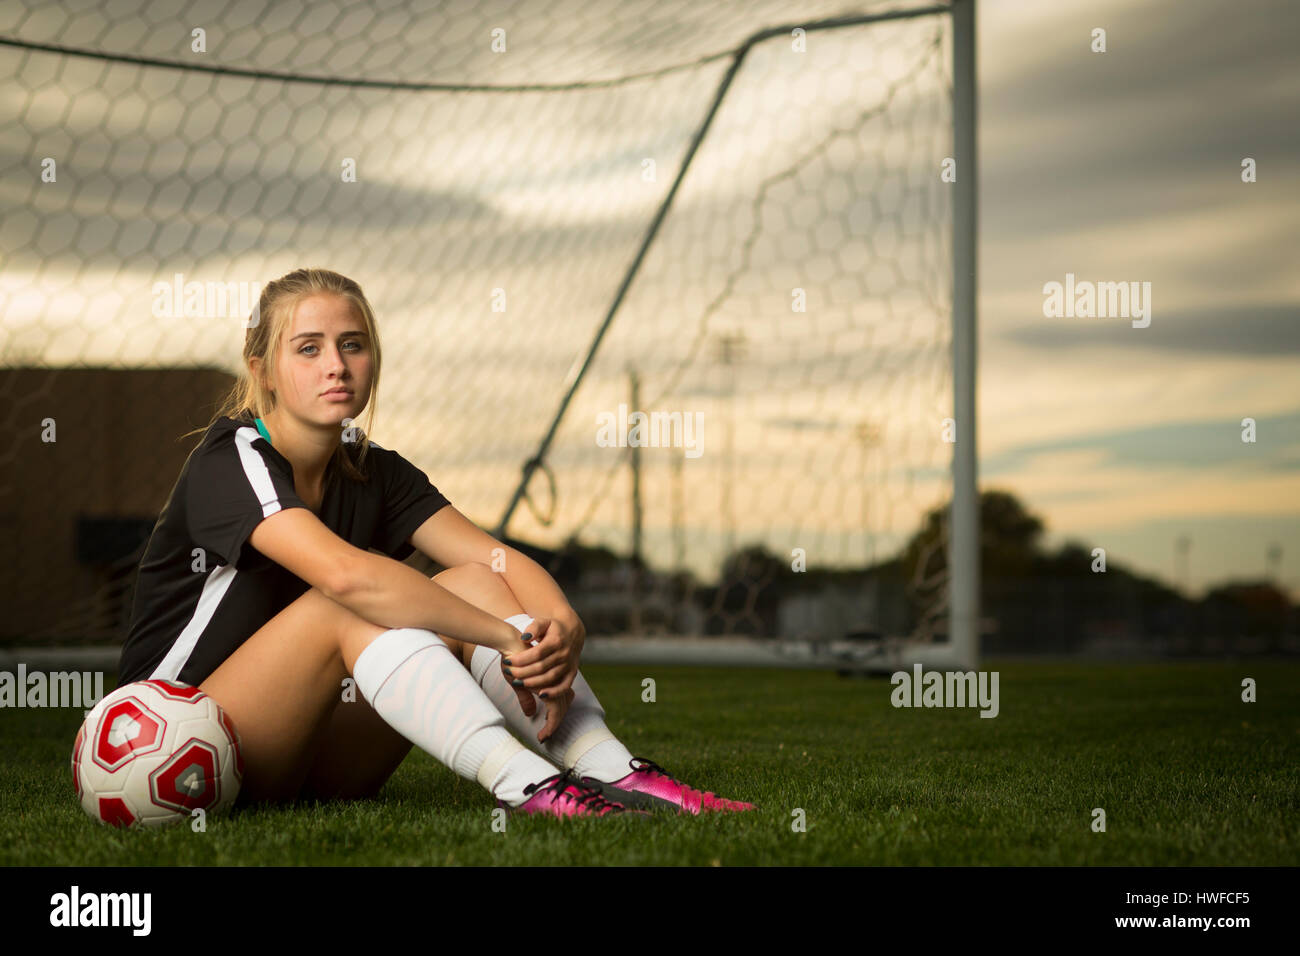 Athlete sitting with ball in soccer goal under sunset sky Stock Photo